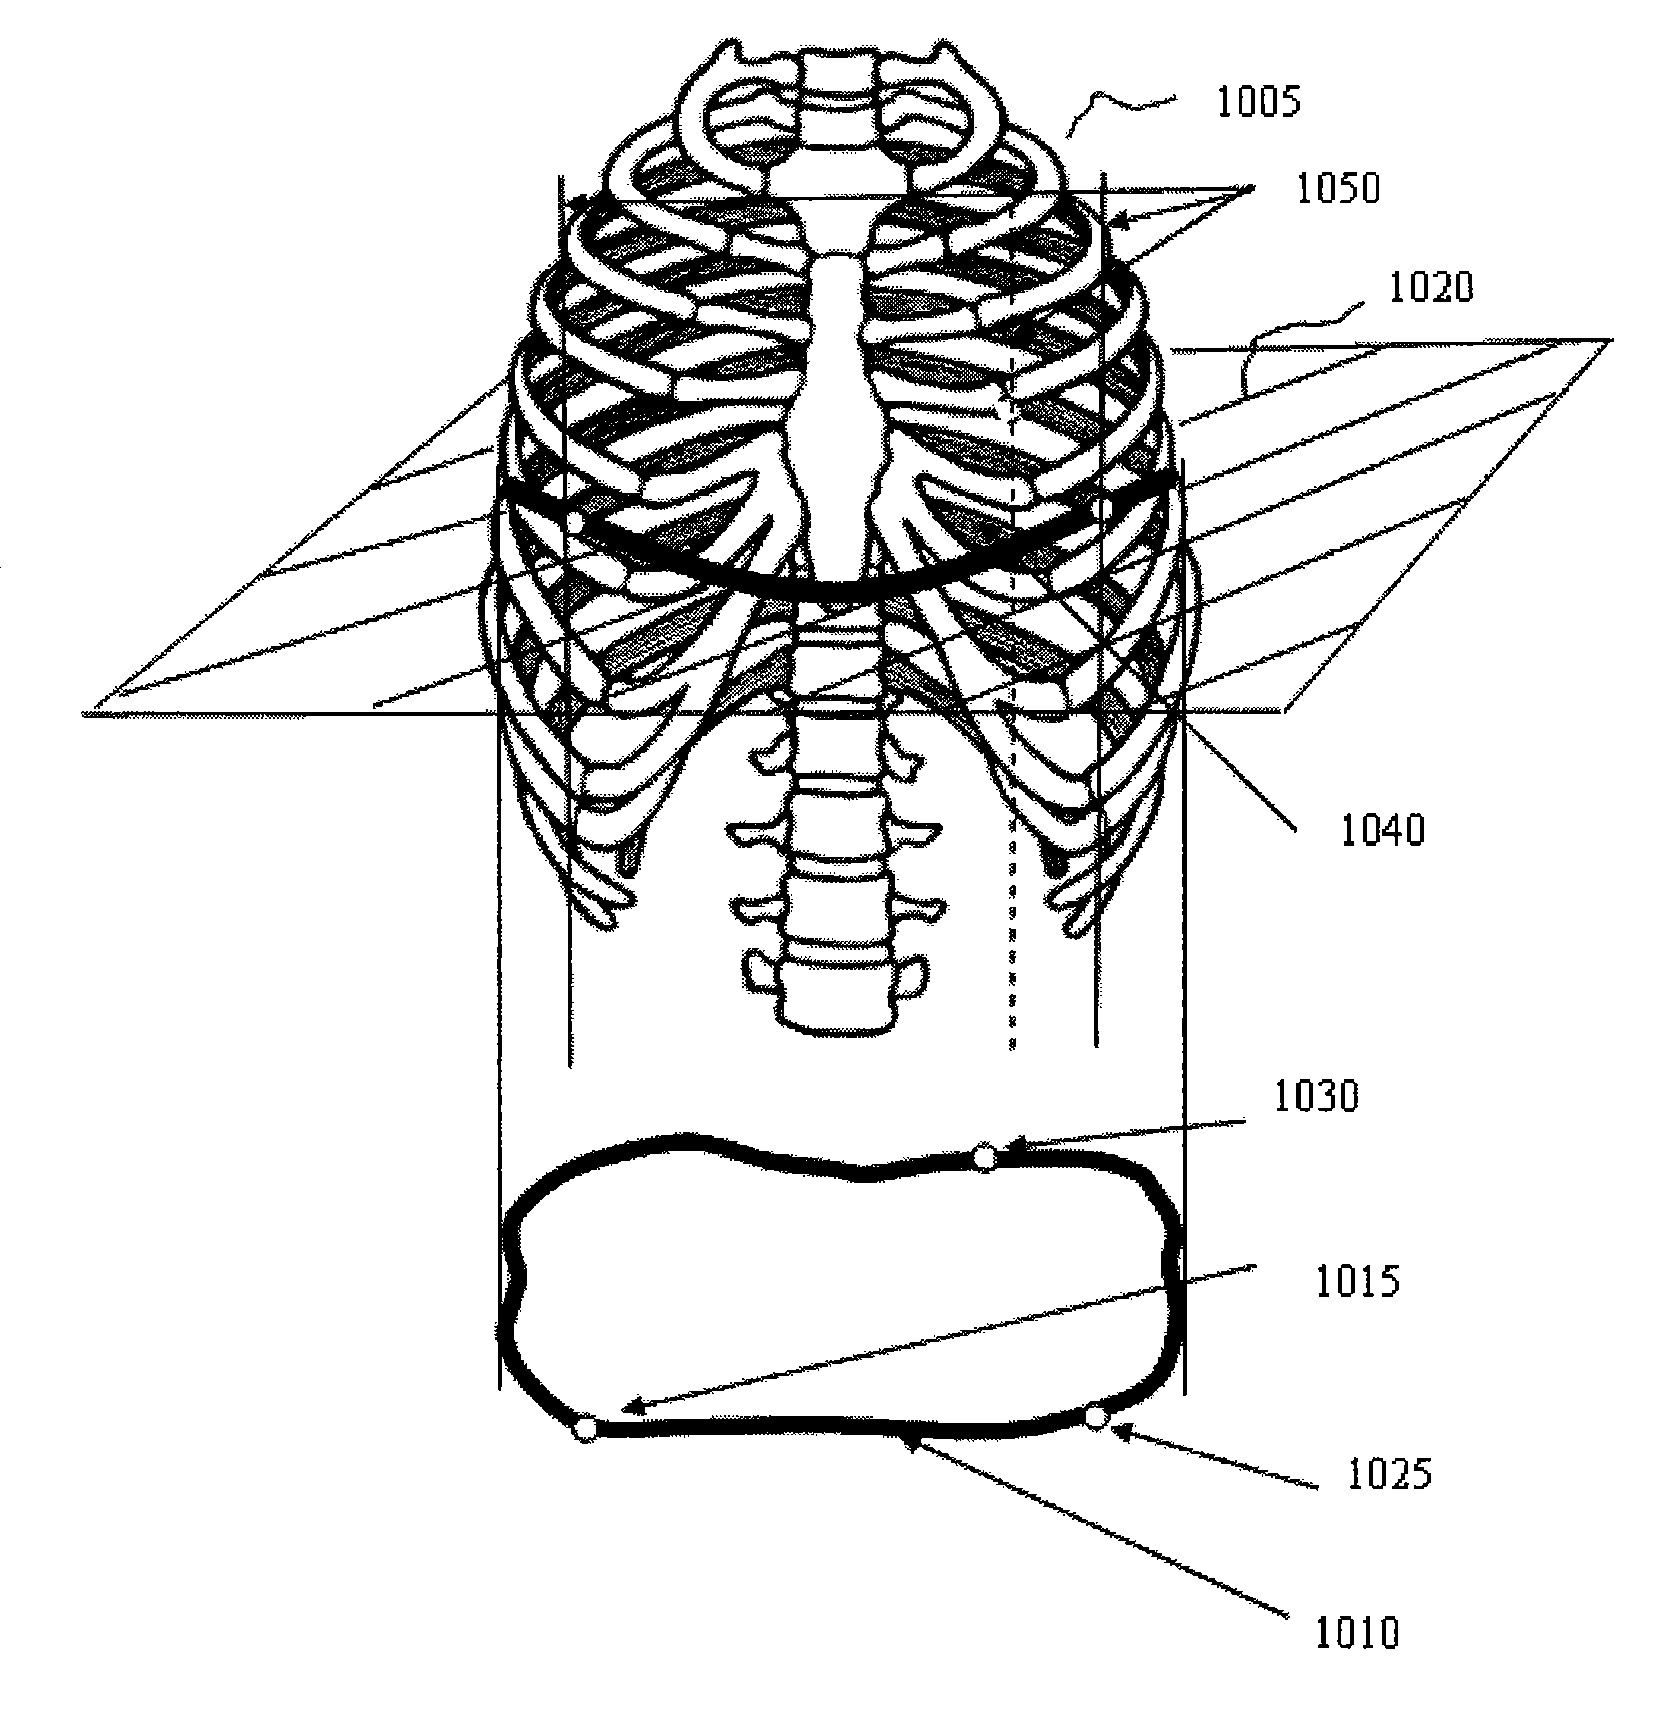 Method for generating three standard surface ECG leads derived from three electrodes contained in the mid-horizontal plane of the torso